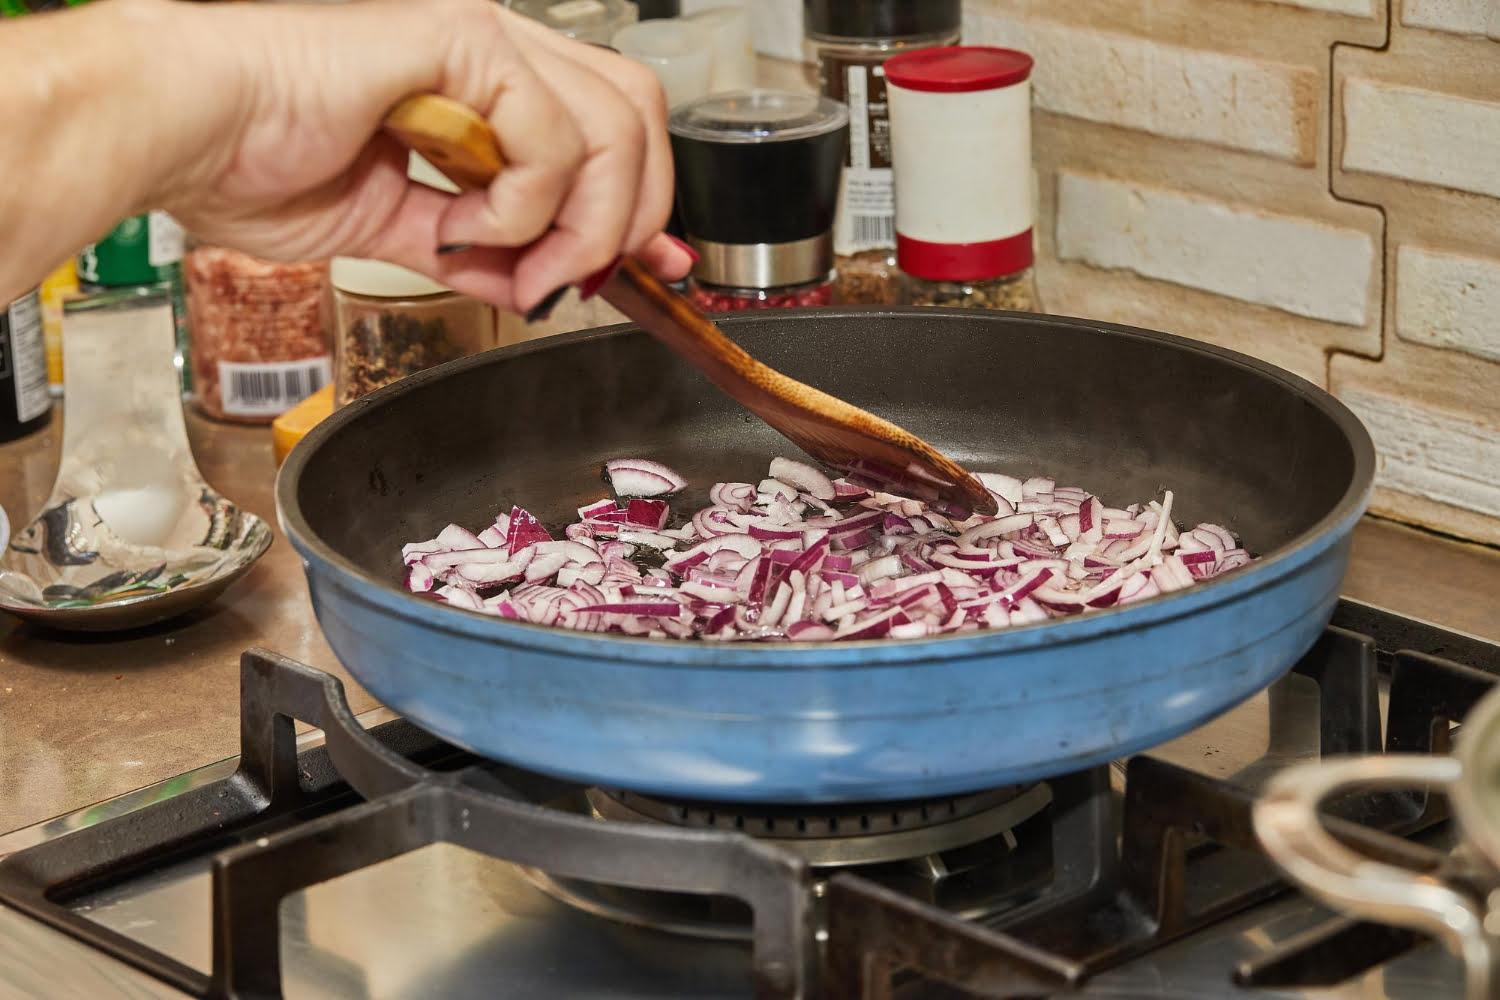 chef stirs purple onions into frying pan gas stove